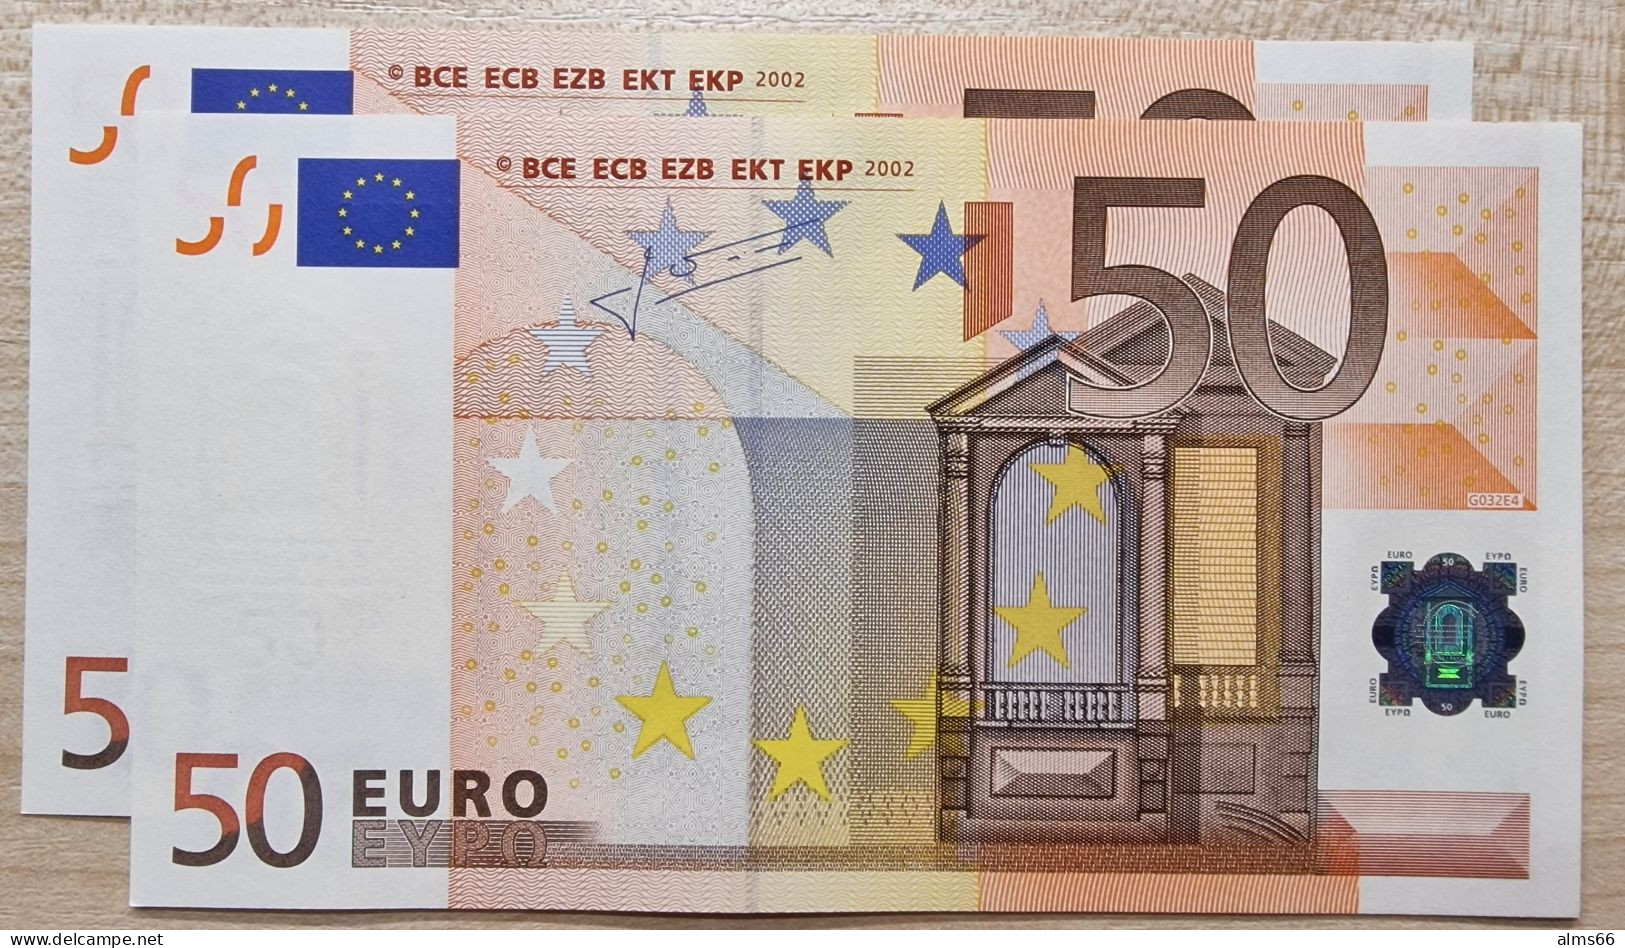 Euronotes FREE SHIPPING 50 Euro 2002 UNC < X >< G032 > Germany - Trichet - 50 Euro